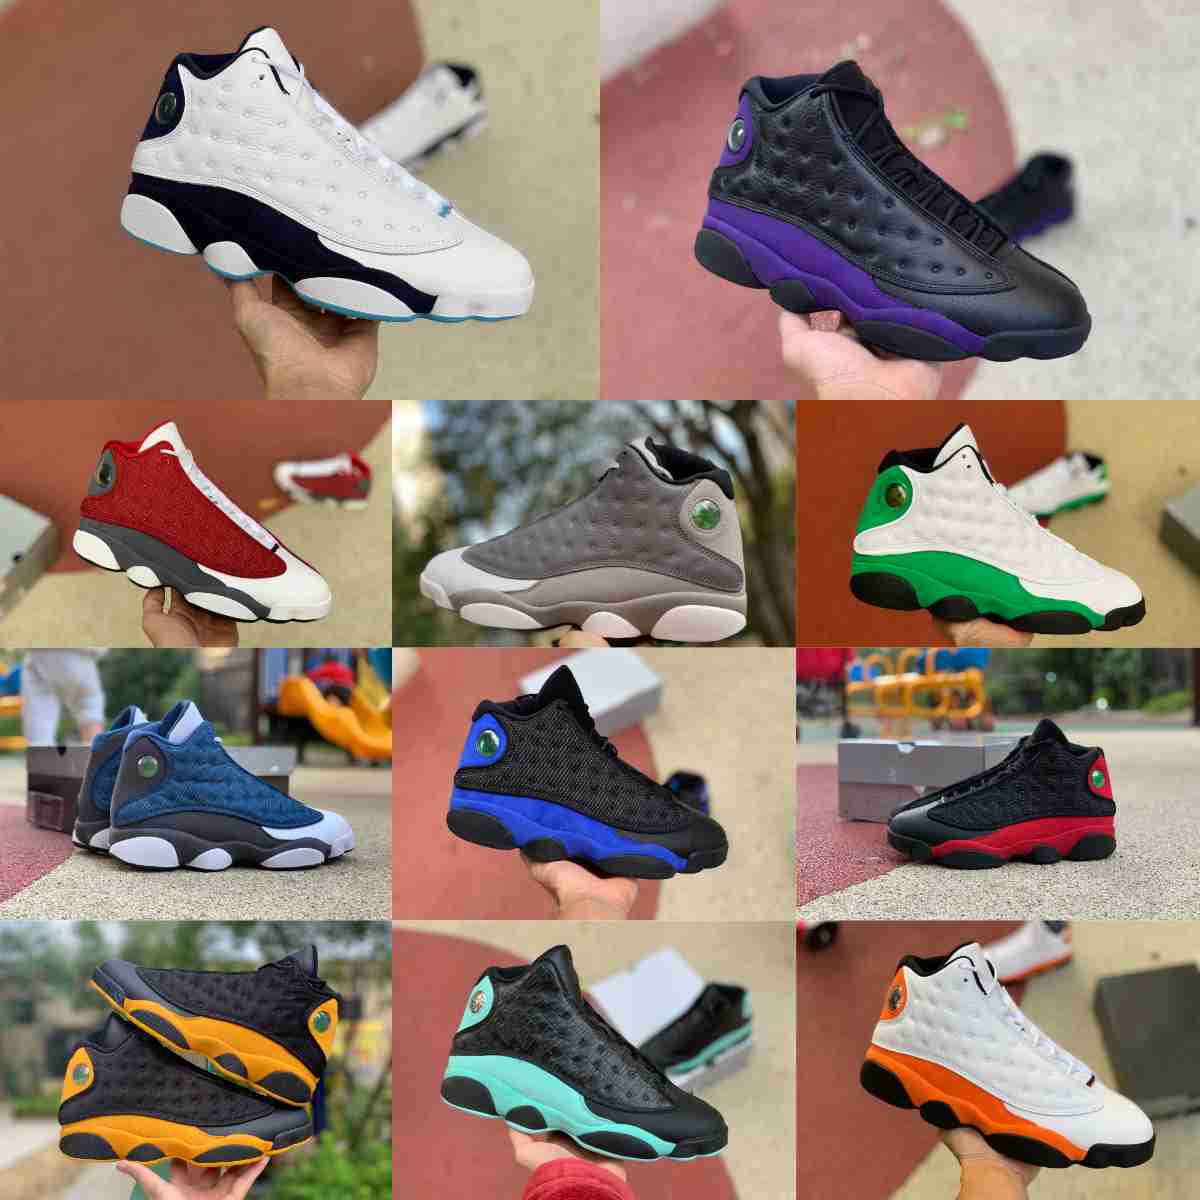 

Jumpman 13 13S Basketball Shoes Mens High Flint Black Cat Grey Toe Court Purple Chicago Bred Island Green Red Dirty Hyper Royal Starfish He Got Game Trainer Sneakers S8, Please contact us